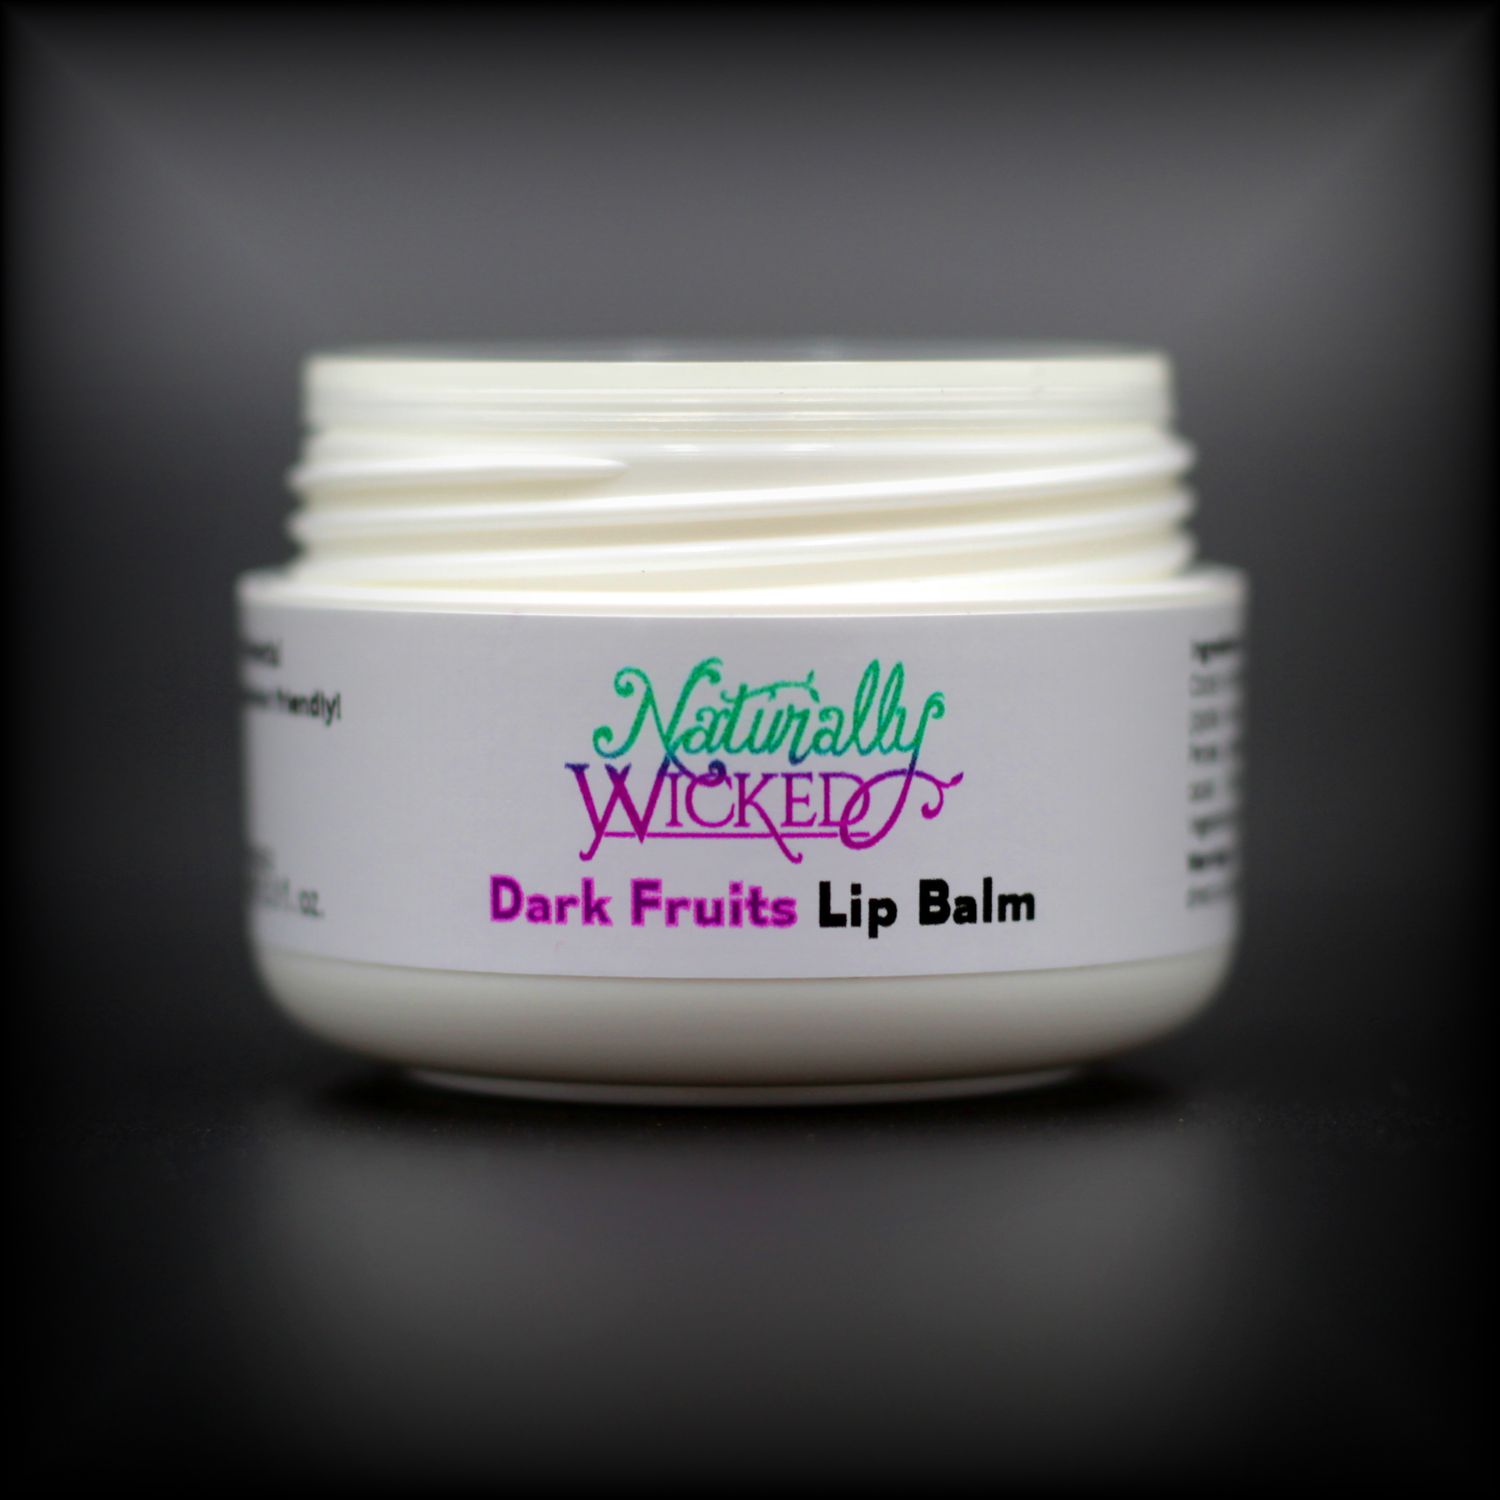 Naturally Wicked Dark Fruits Lip Balm Container Without Lid, Exposing Screwed Connection & Seal